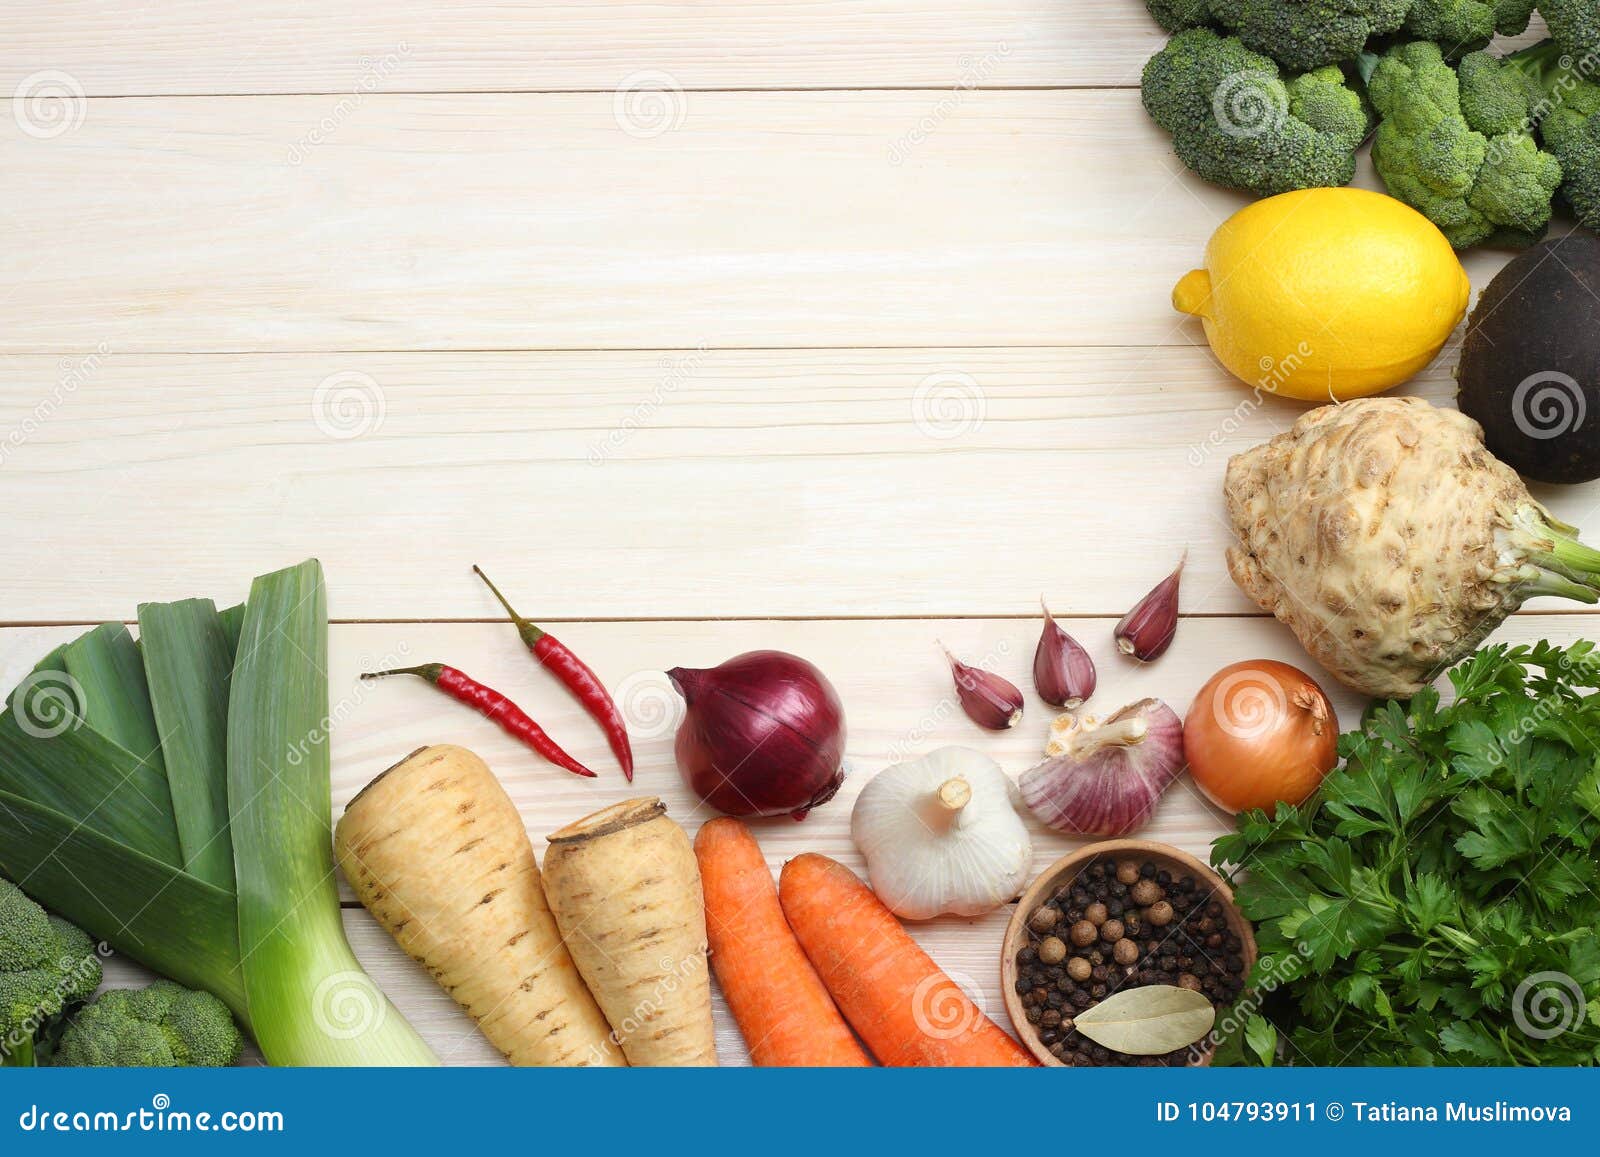 Download Fresh Vegetables On White Wooden Background Mockup For Menu Or Recipe Top View With Copy Space Stock Image Image Of Food Harvest 104793911